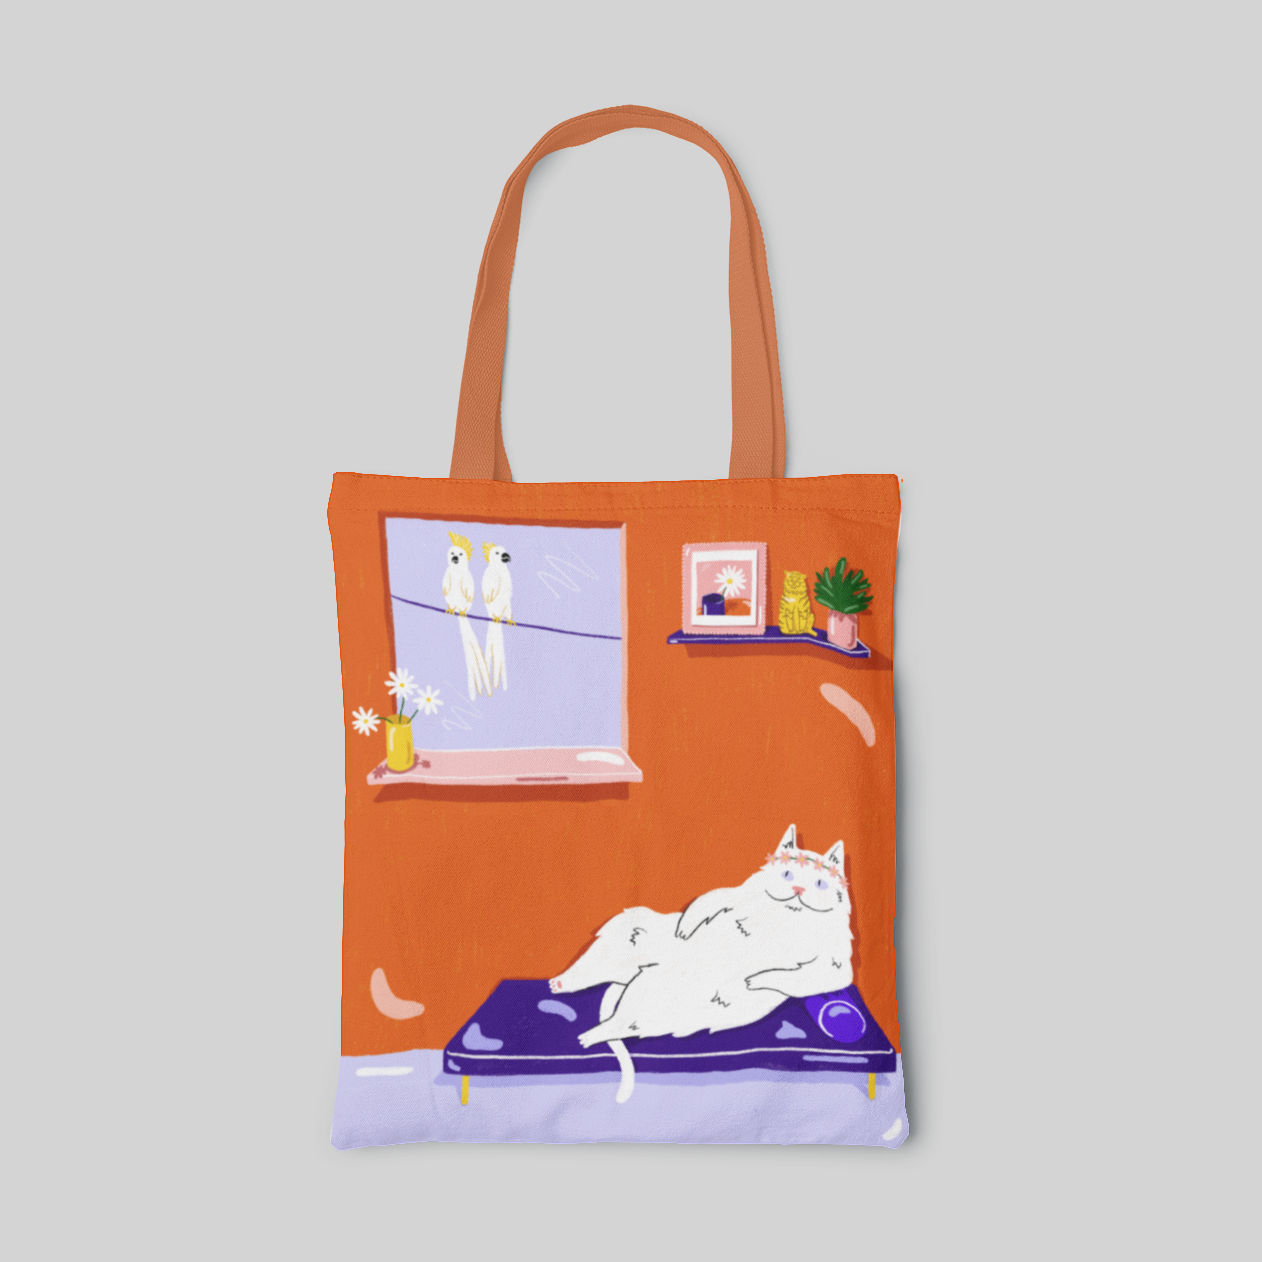 Orange tote bag with white cat and two white birds on the window